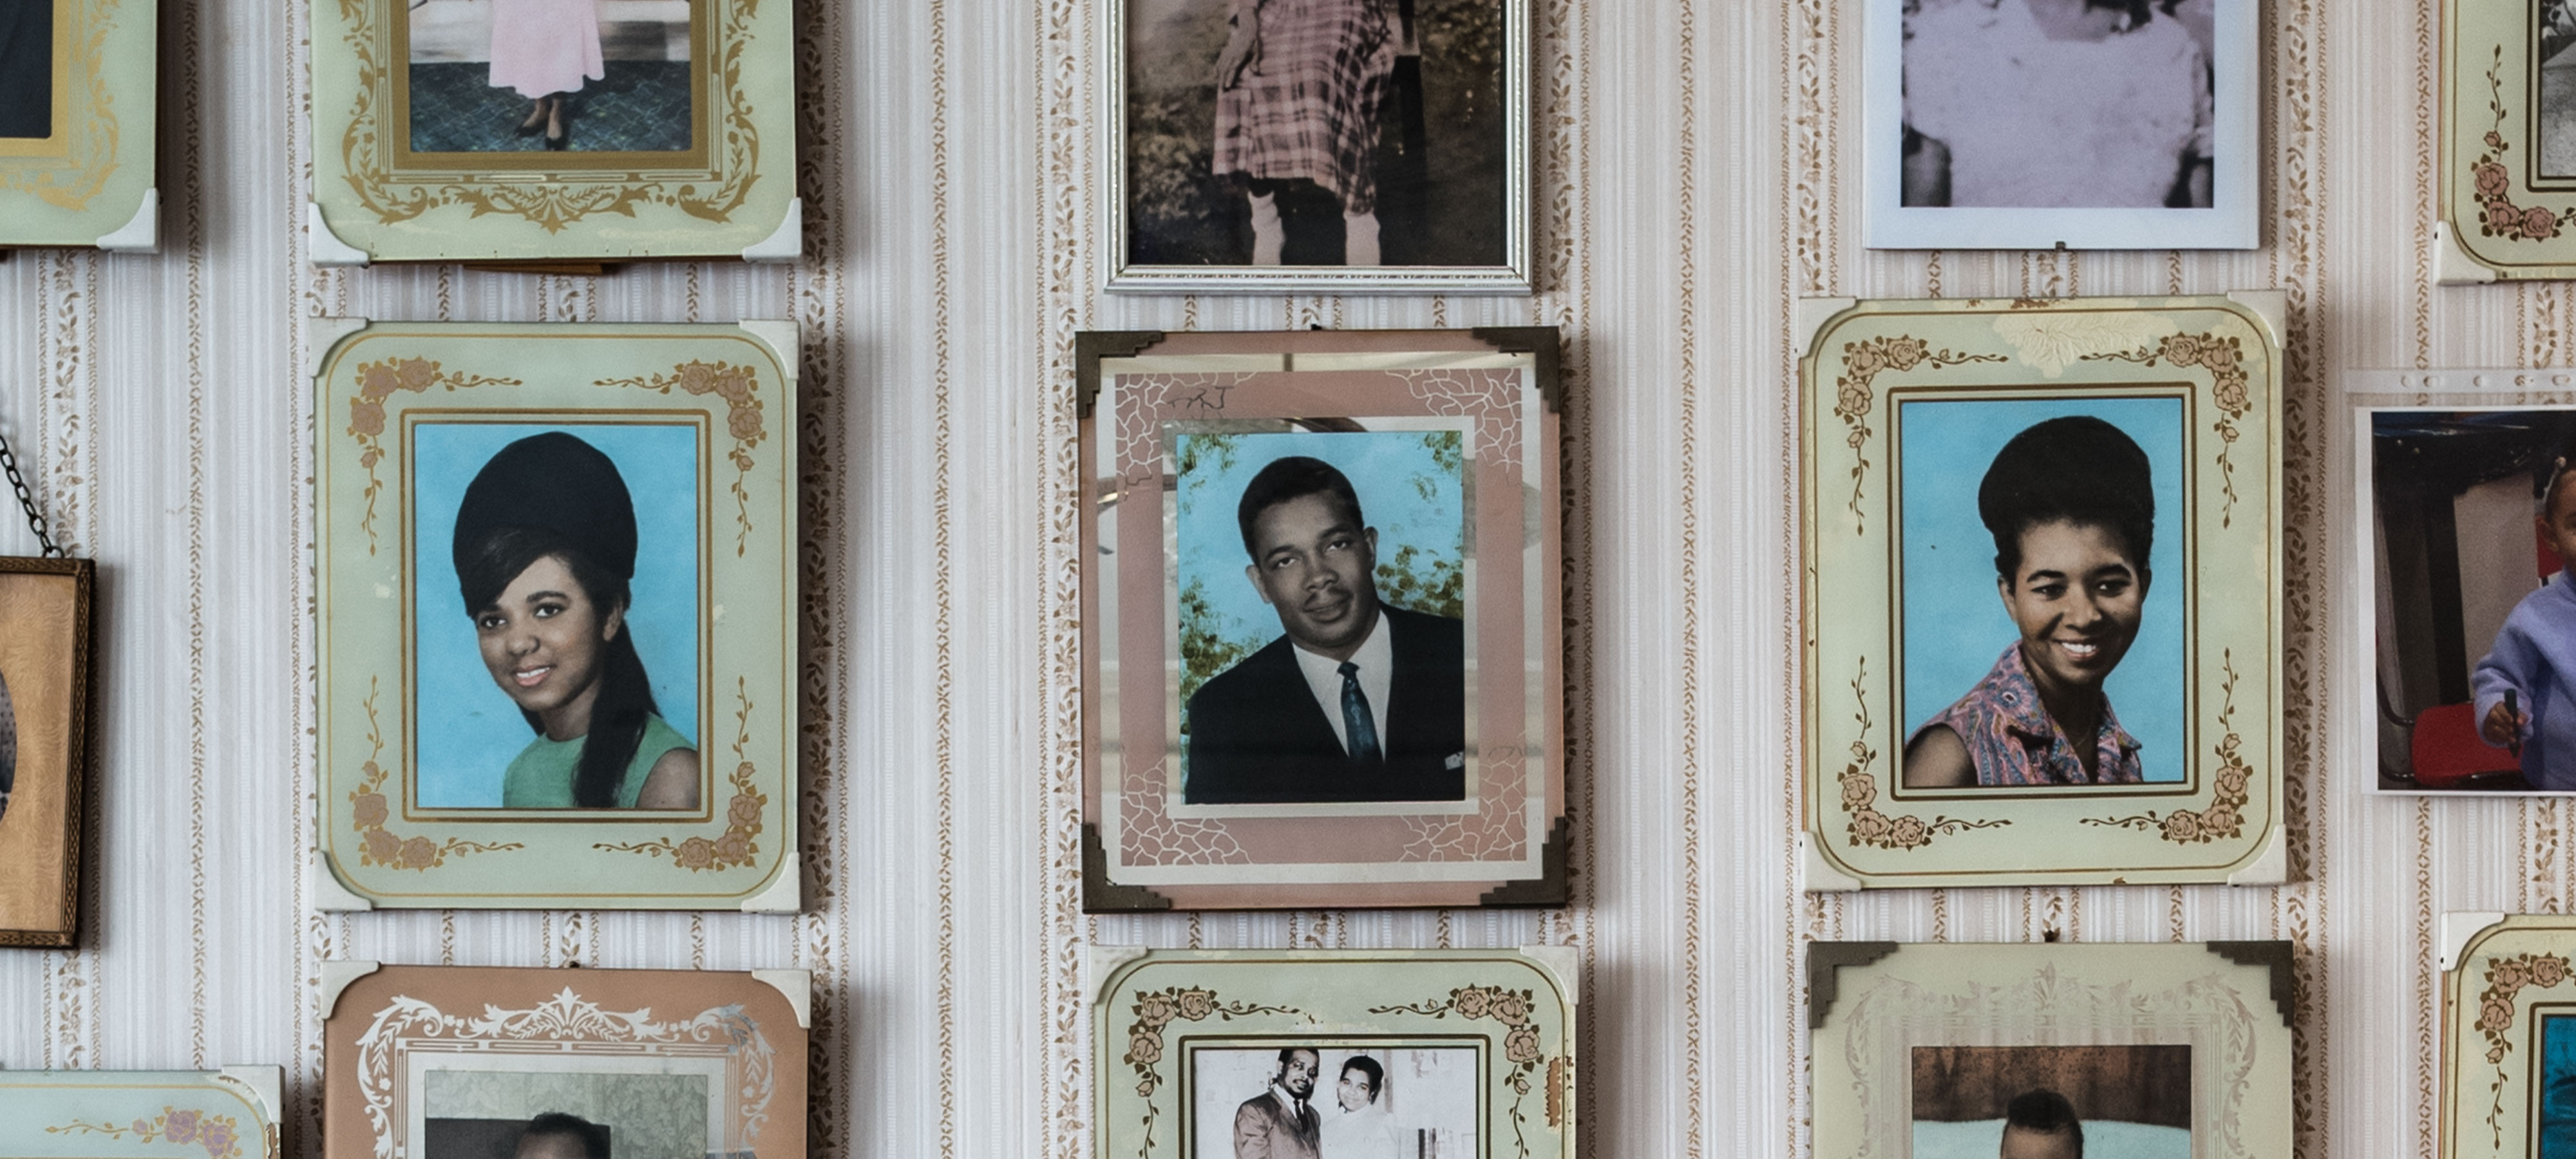 Family portraits hung on a wall in a Jamaican home in London in pastel frames with distinctive flower designs like those profiled by photographer Jim Grover in his 2018 exhibit "Windrush: Portrait of a Generation."